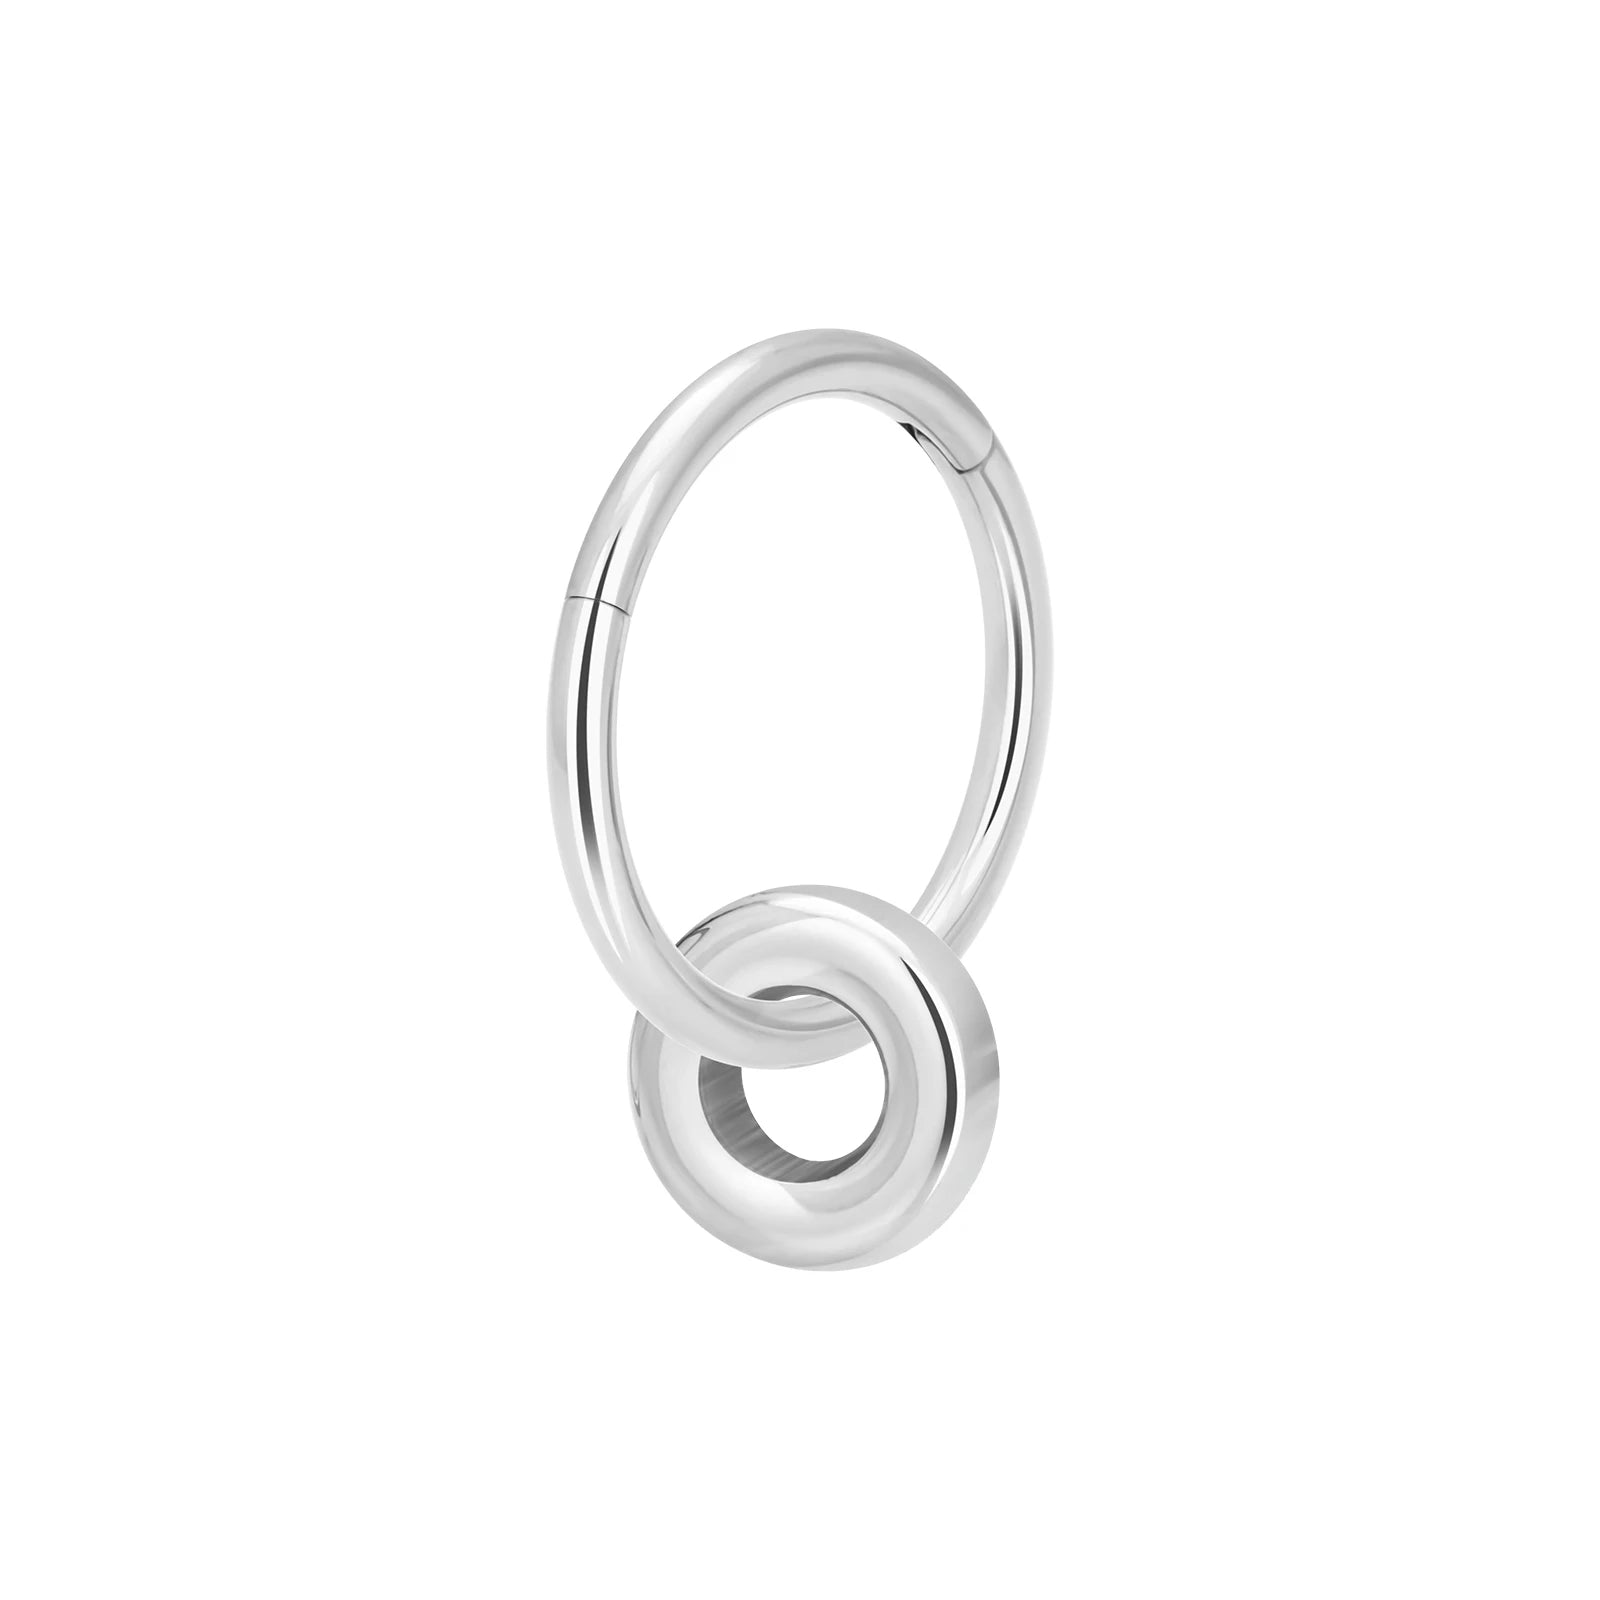 Dangle septum ring with a small circle 16G titanium septum clicker Ashley Piercing Jewelry